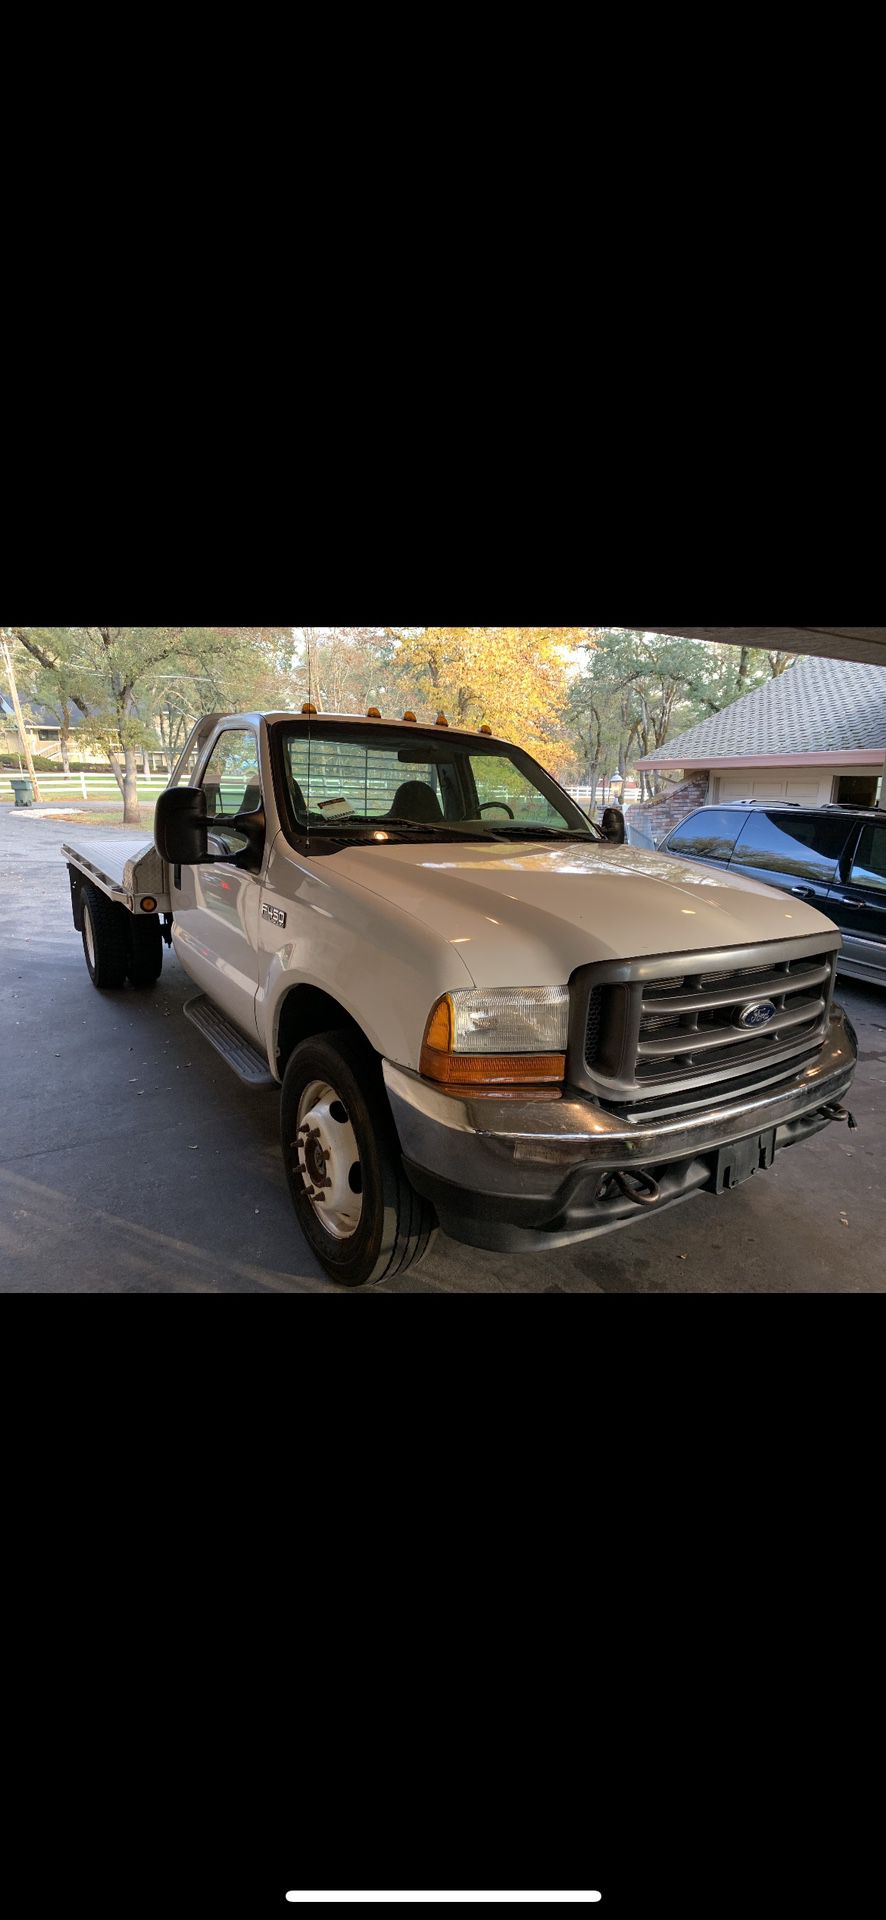 2001 Ford F-450 Super Duty Regular Cab & Chassis